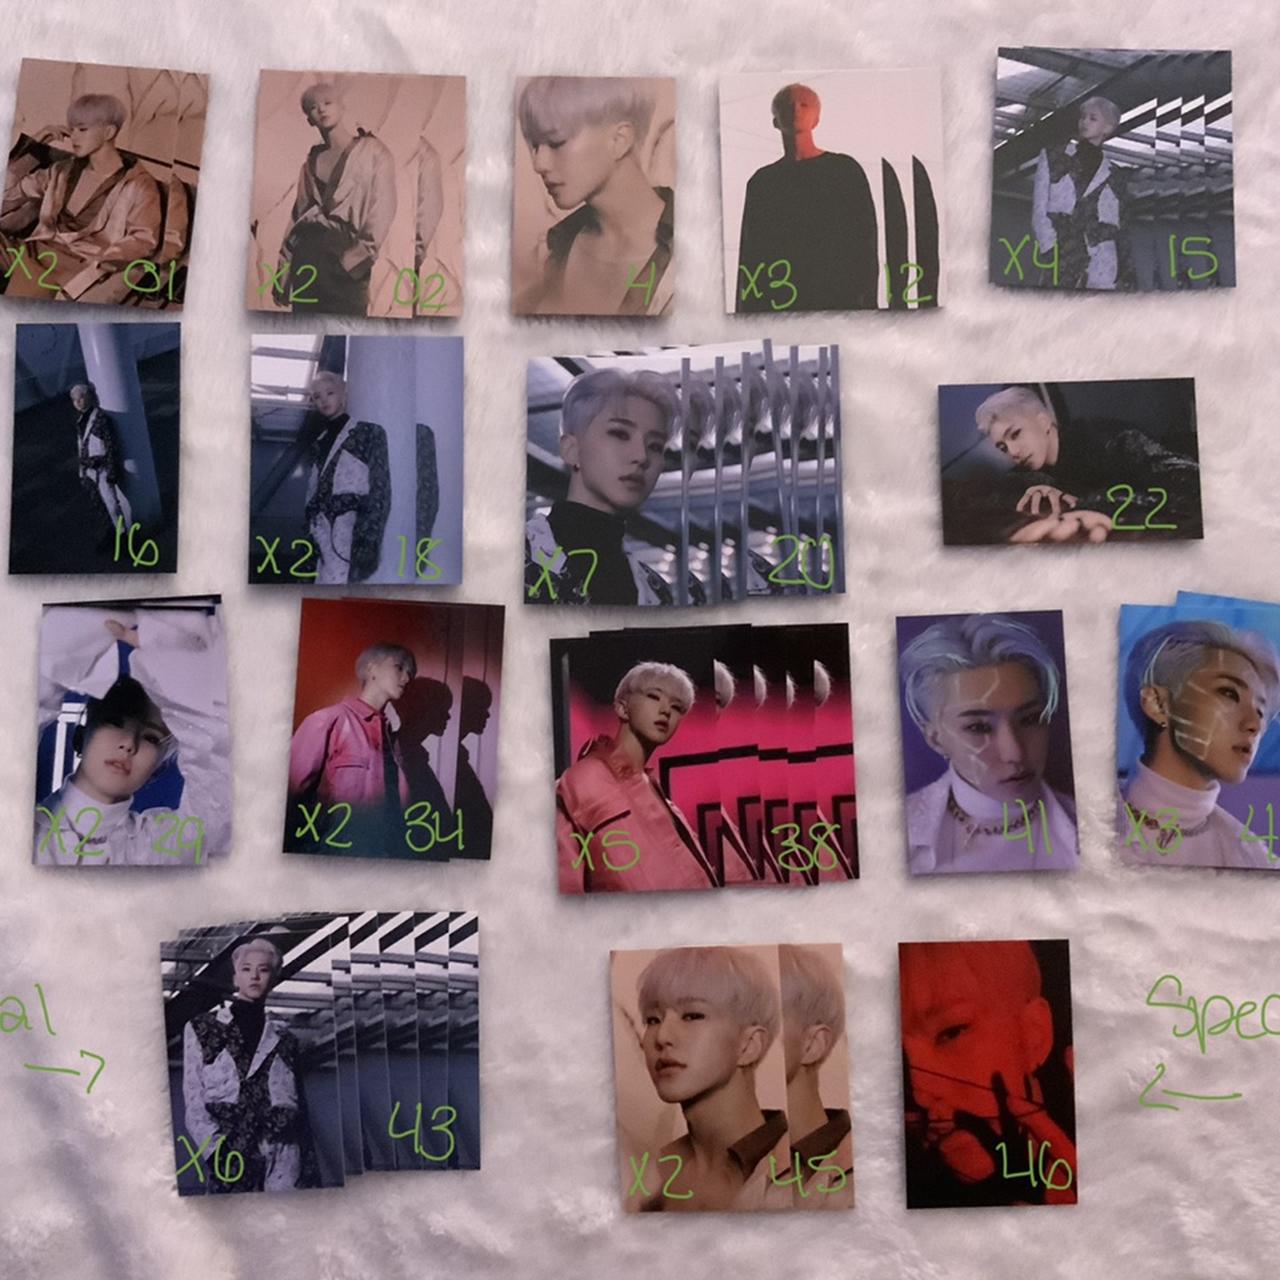 WTS / WTT Hoshi Spider Trading Cards, I’m trying to